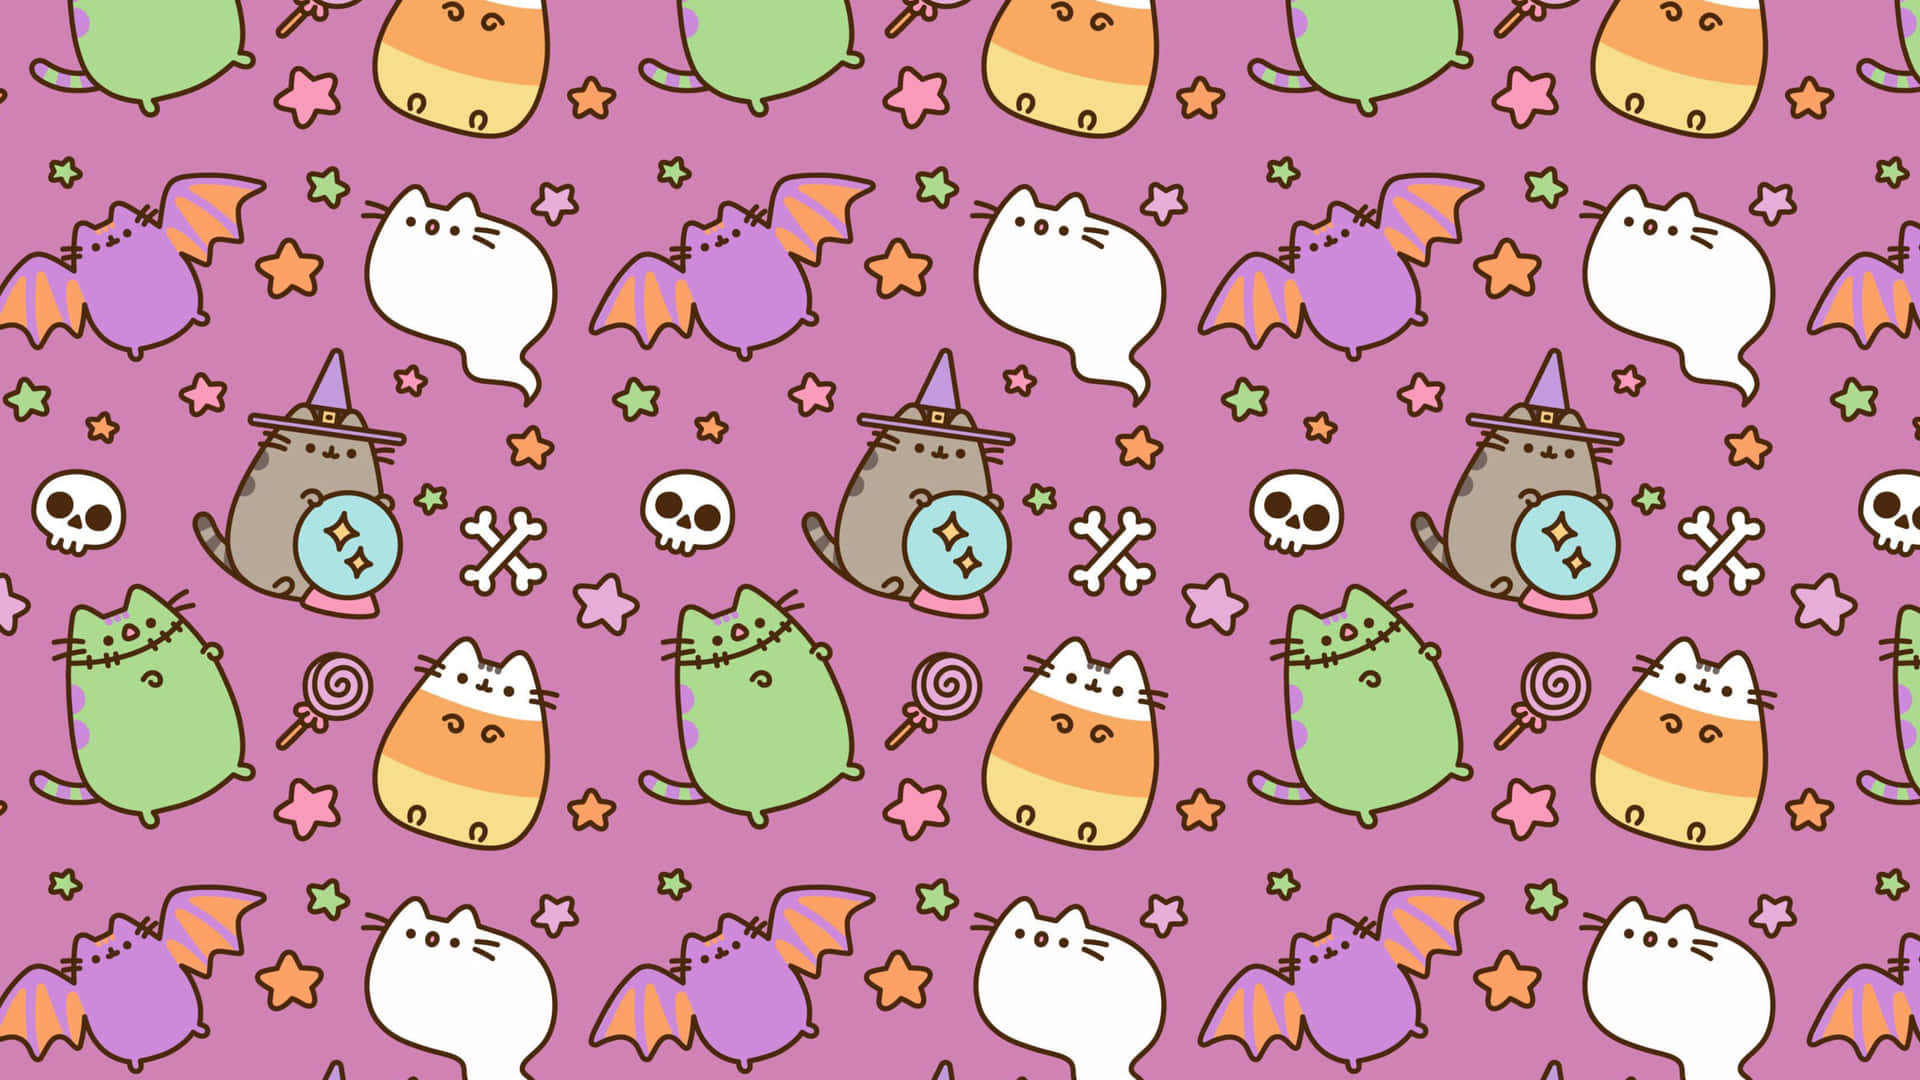 Pusheen the Cat Surfing the Web On the PC Wallpaper